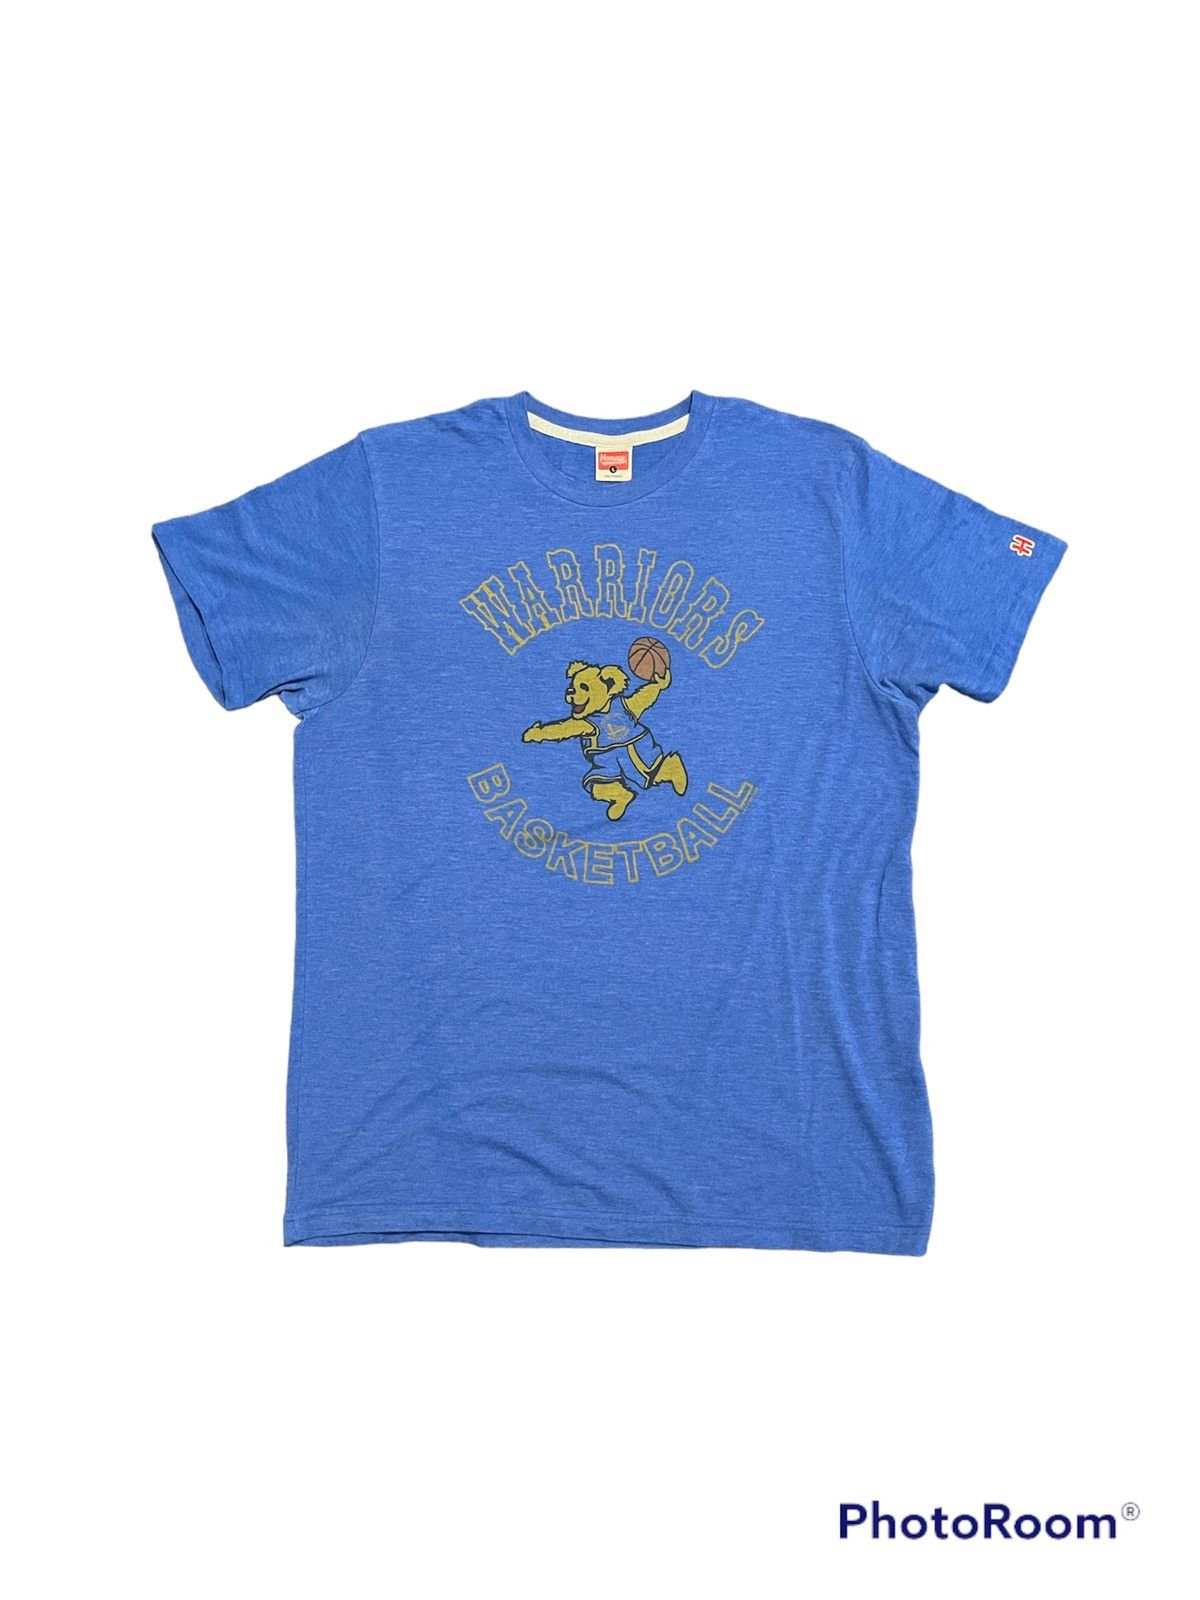 NBA x Grateful Dead x Warriors T-Shirt from Homage. | Royal Blue | Vintage Apparel from Homage.